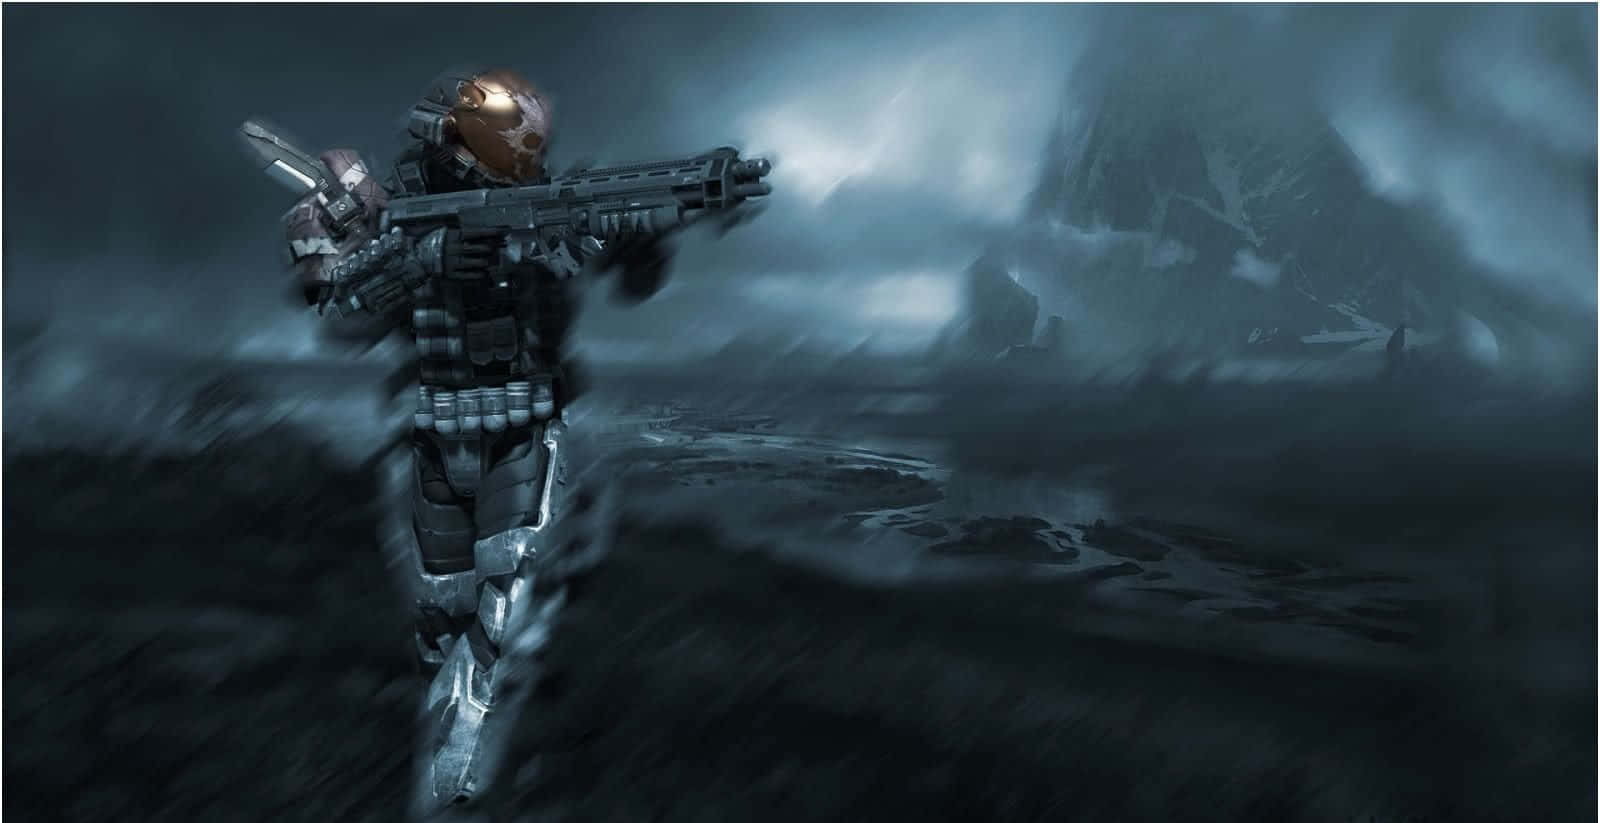 Halo Emile - The Fearless and Powerful Spartan Soldier Wallpaper